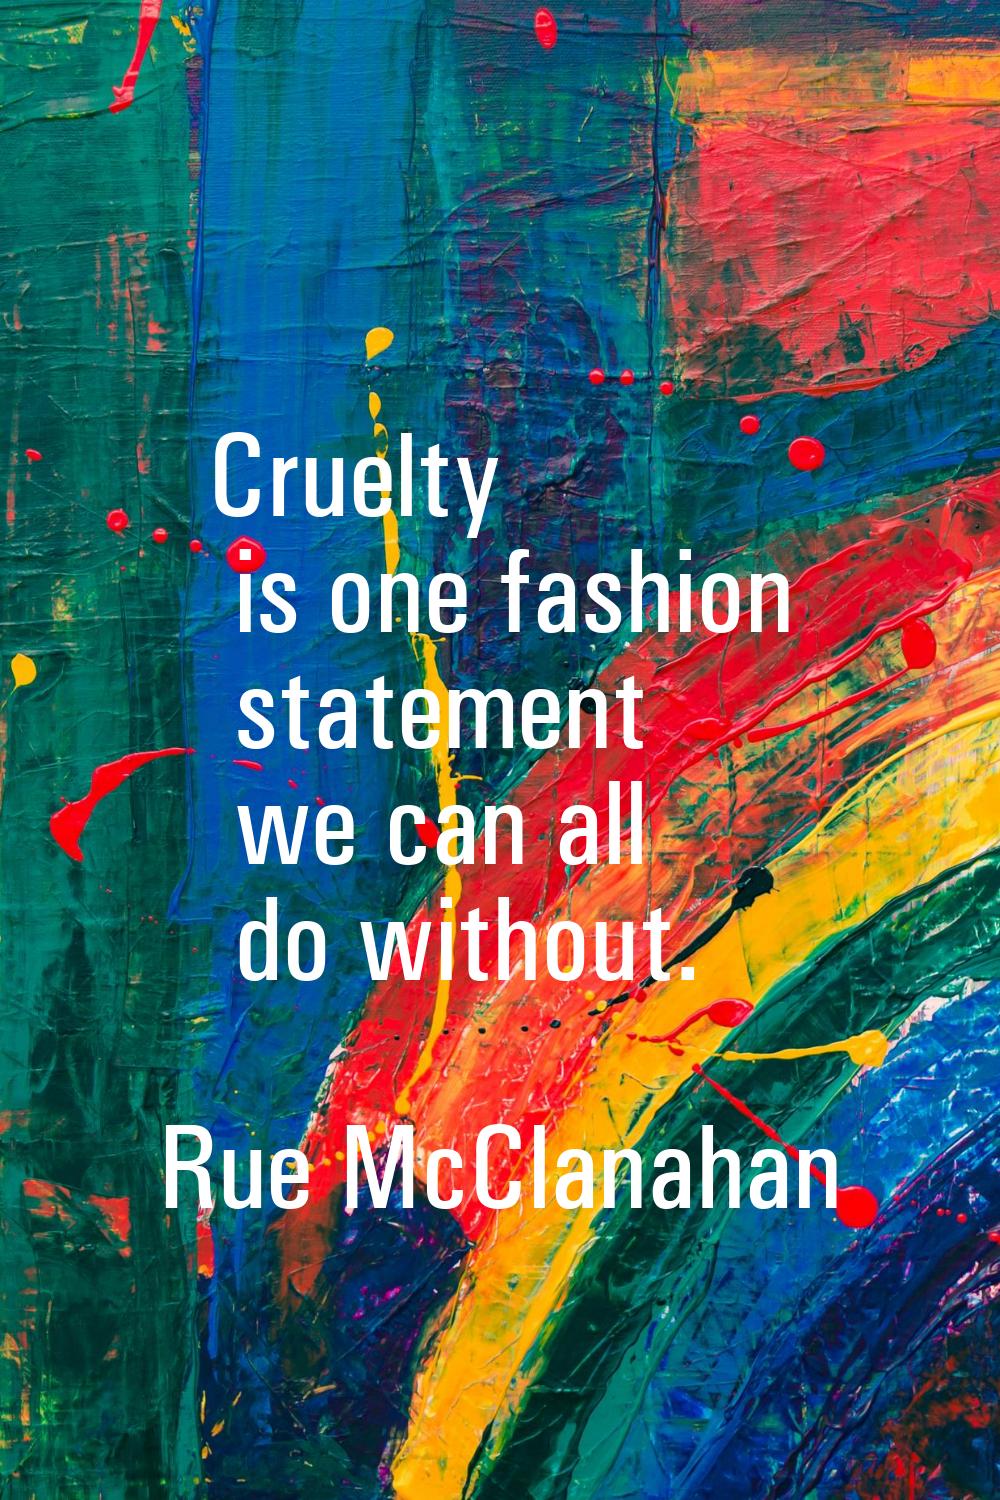 Cruelty is one fashion statement we can all do without.